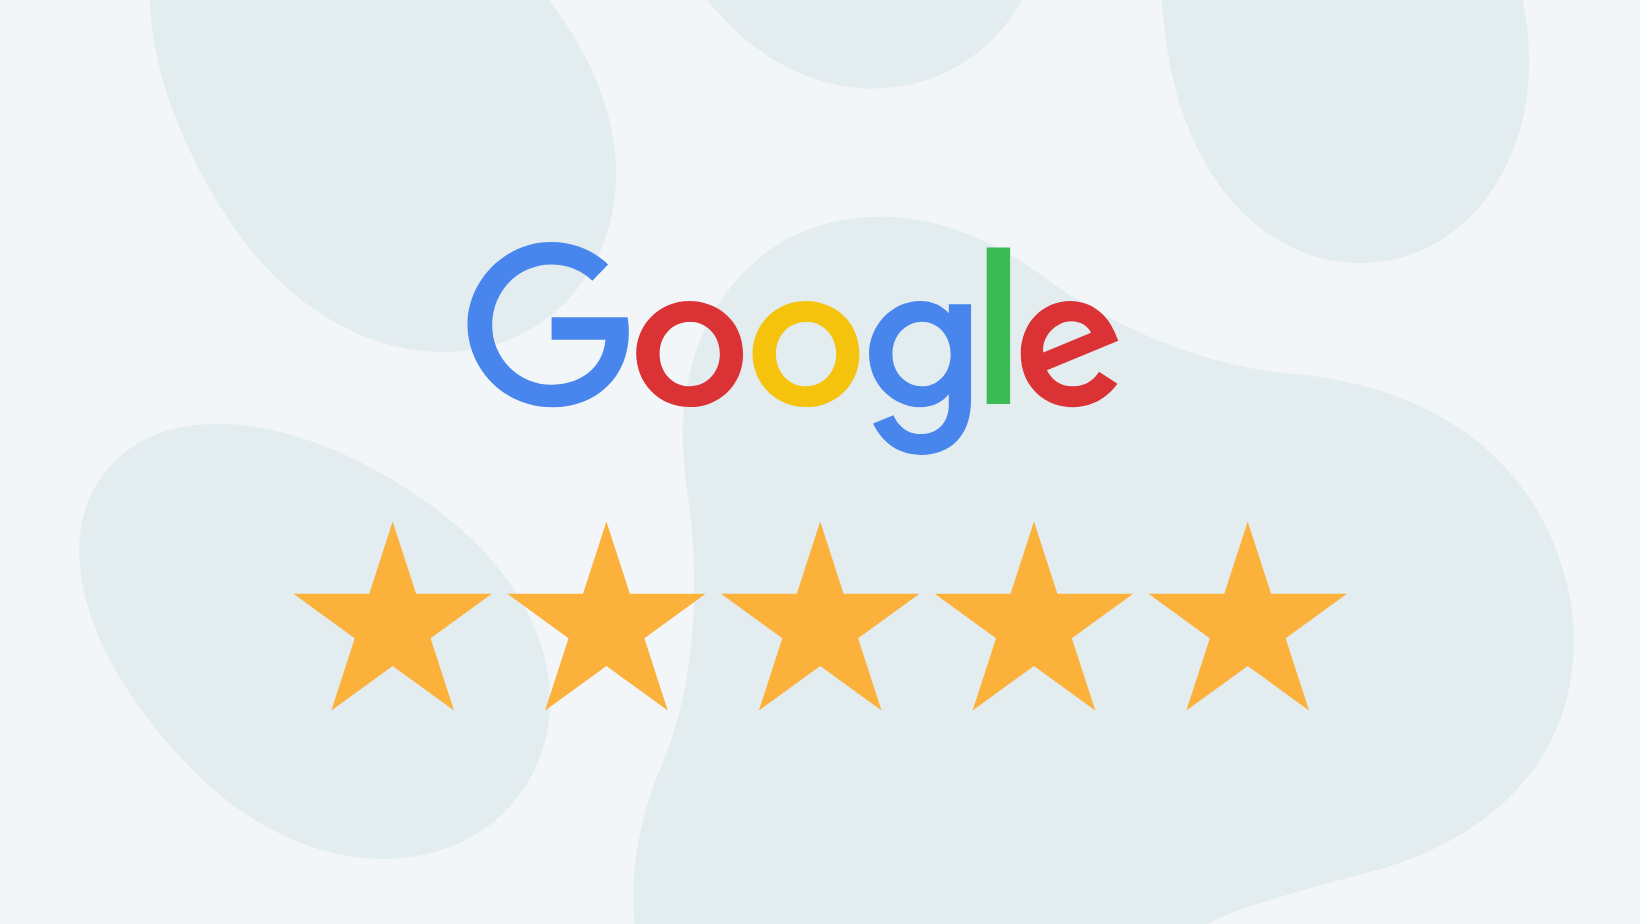 5 star google review